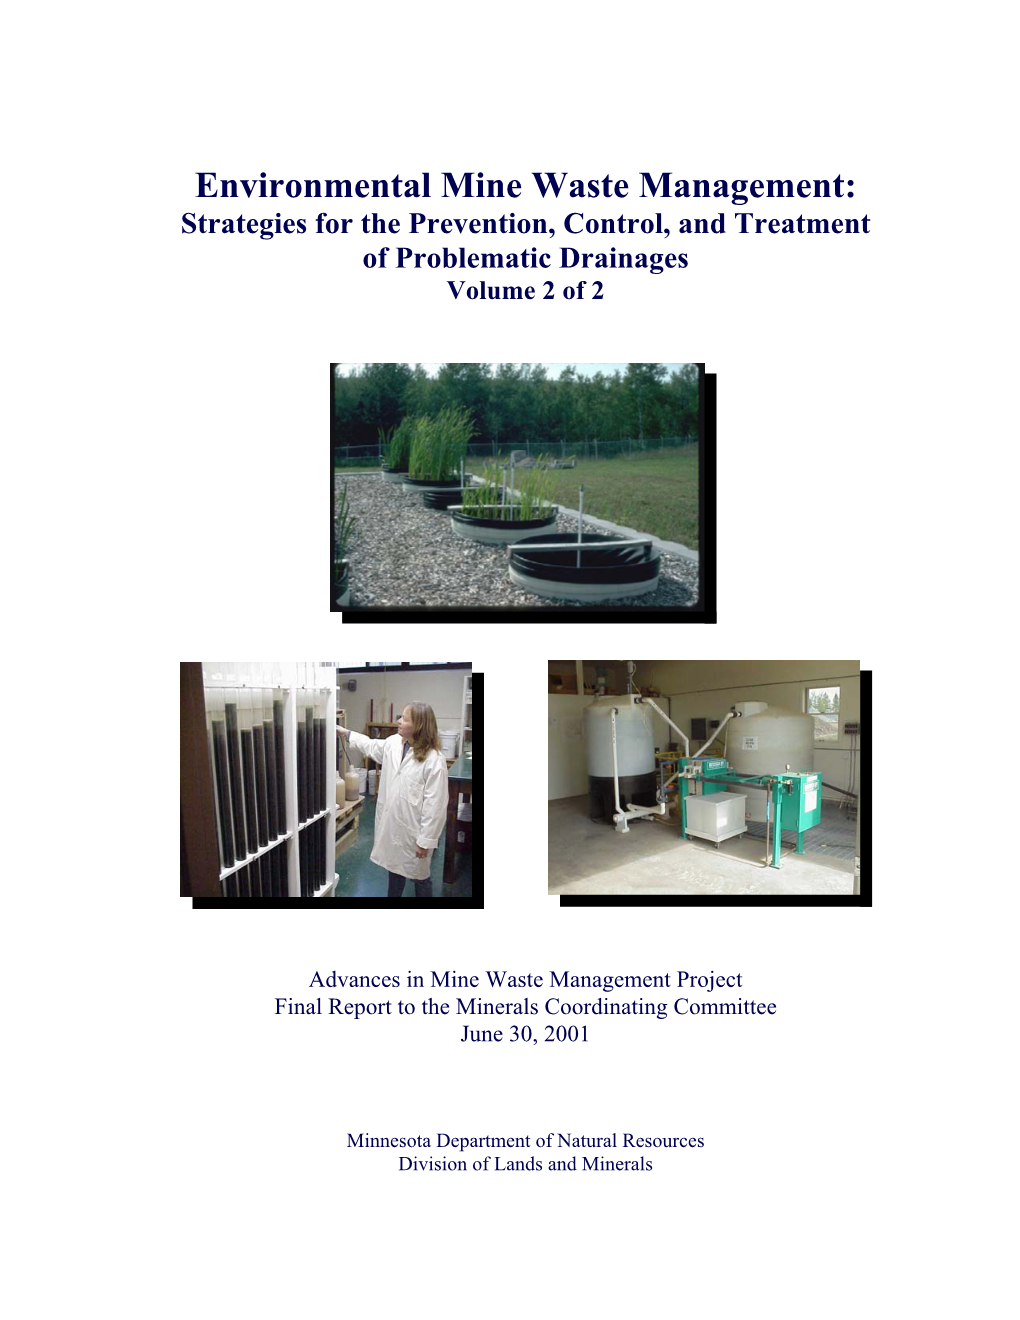 Environmental Mine Waste Management: Strategies for the Prevention, Control, and Treatment of Problematic Drainages Volume 2 of 2